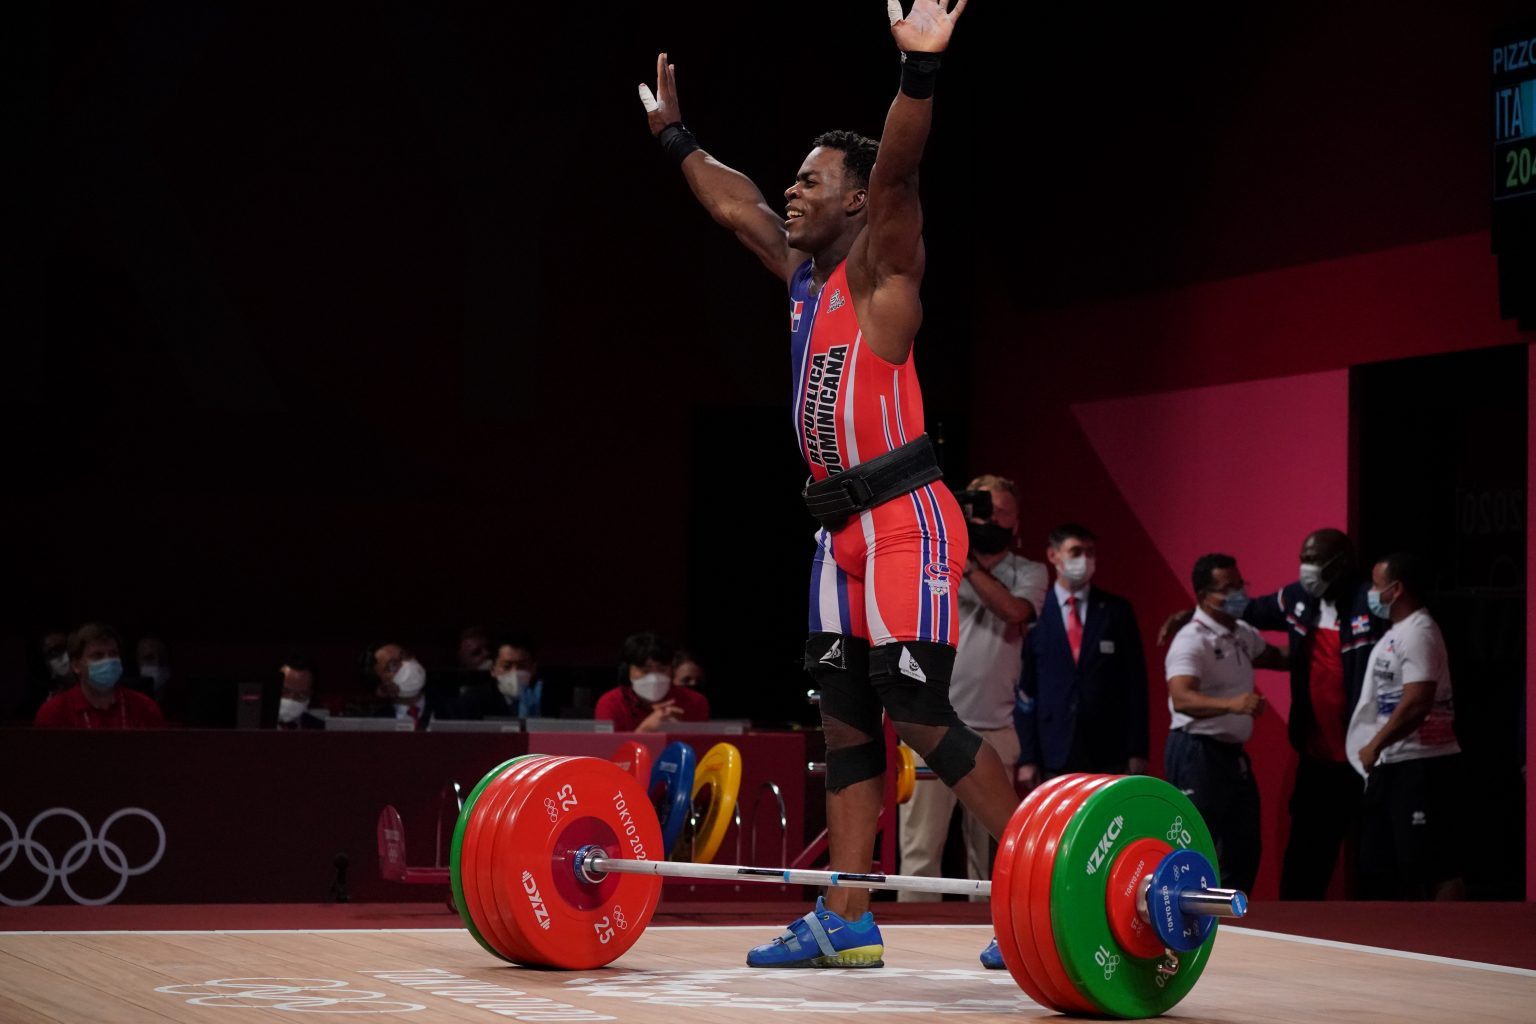 Tokyo 2020 silver medallist Zacarias Bonnat of the Dominican Republic has been elected to the IWF's Athletes' Commission ©IWF